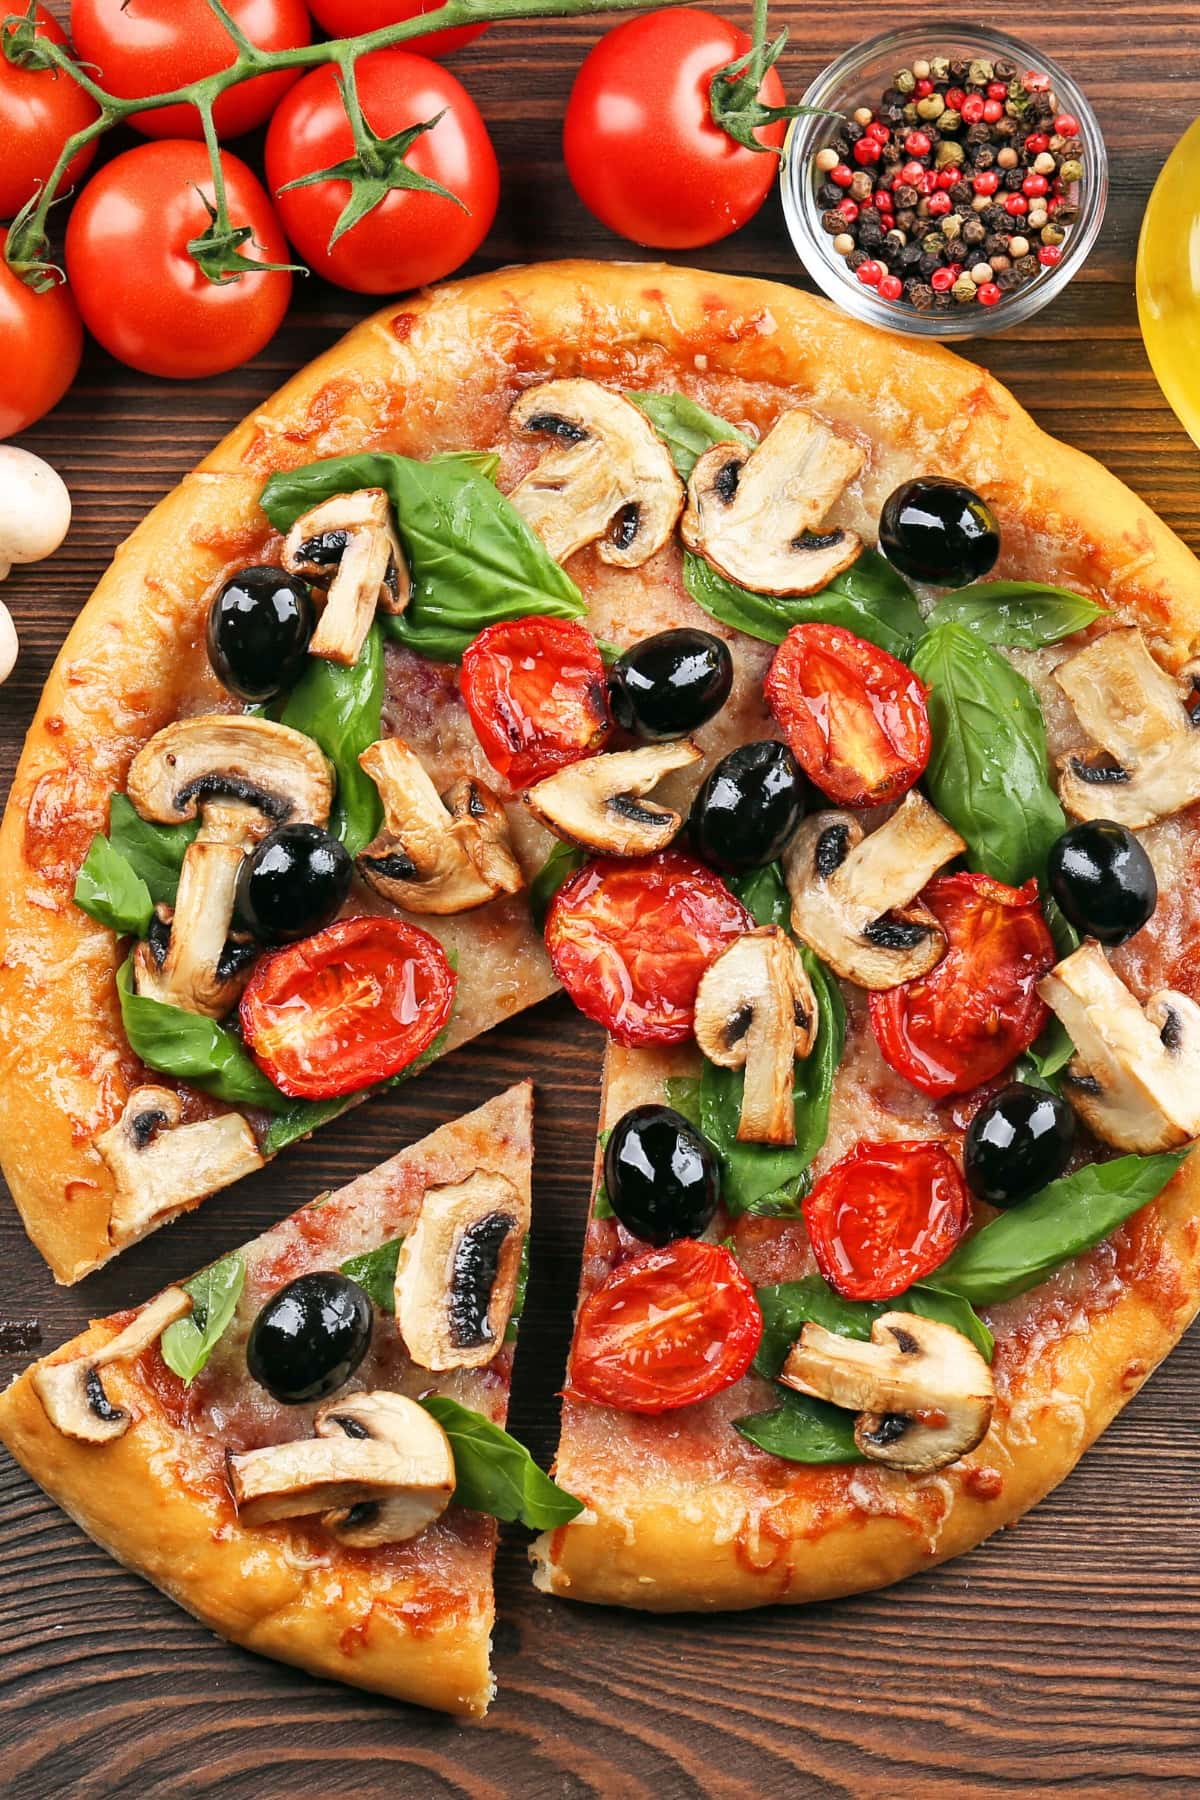 Homemade Oven Pizza with Mushrooms, Tomatoes and Olives